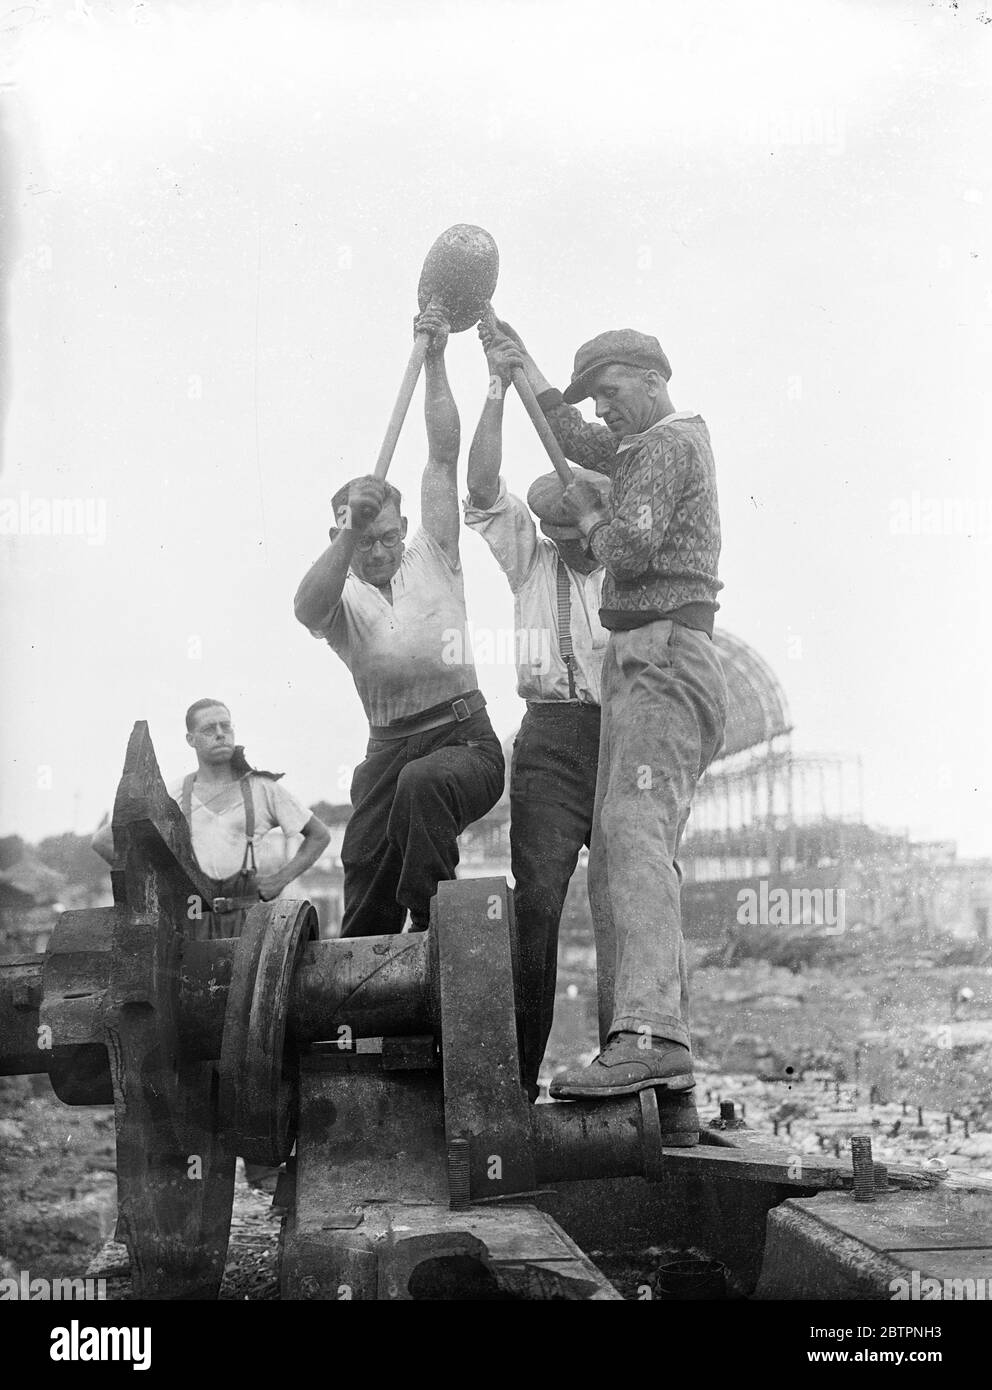 Three hands for this job. Waking up Crystal Palace with 100pound hammer. The huge hammer with a double shaft, weighing 100 pounds, and needing to men to wield it is being used in breaking up the debris left at Crystal Palace after the disastrous fire last year. Photo shows, three, workmen using the double shaft, 100 pound hammer at the Crystal Palace. 22 June 1937 Stock Photo